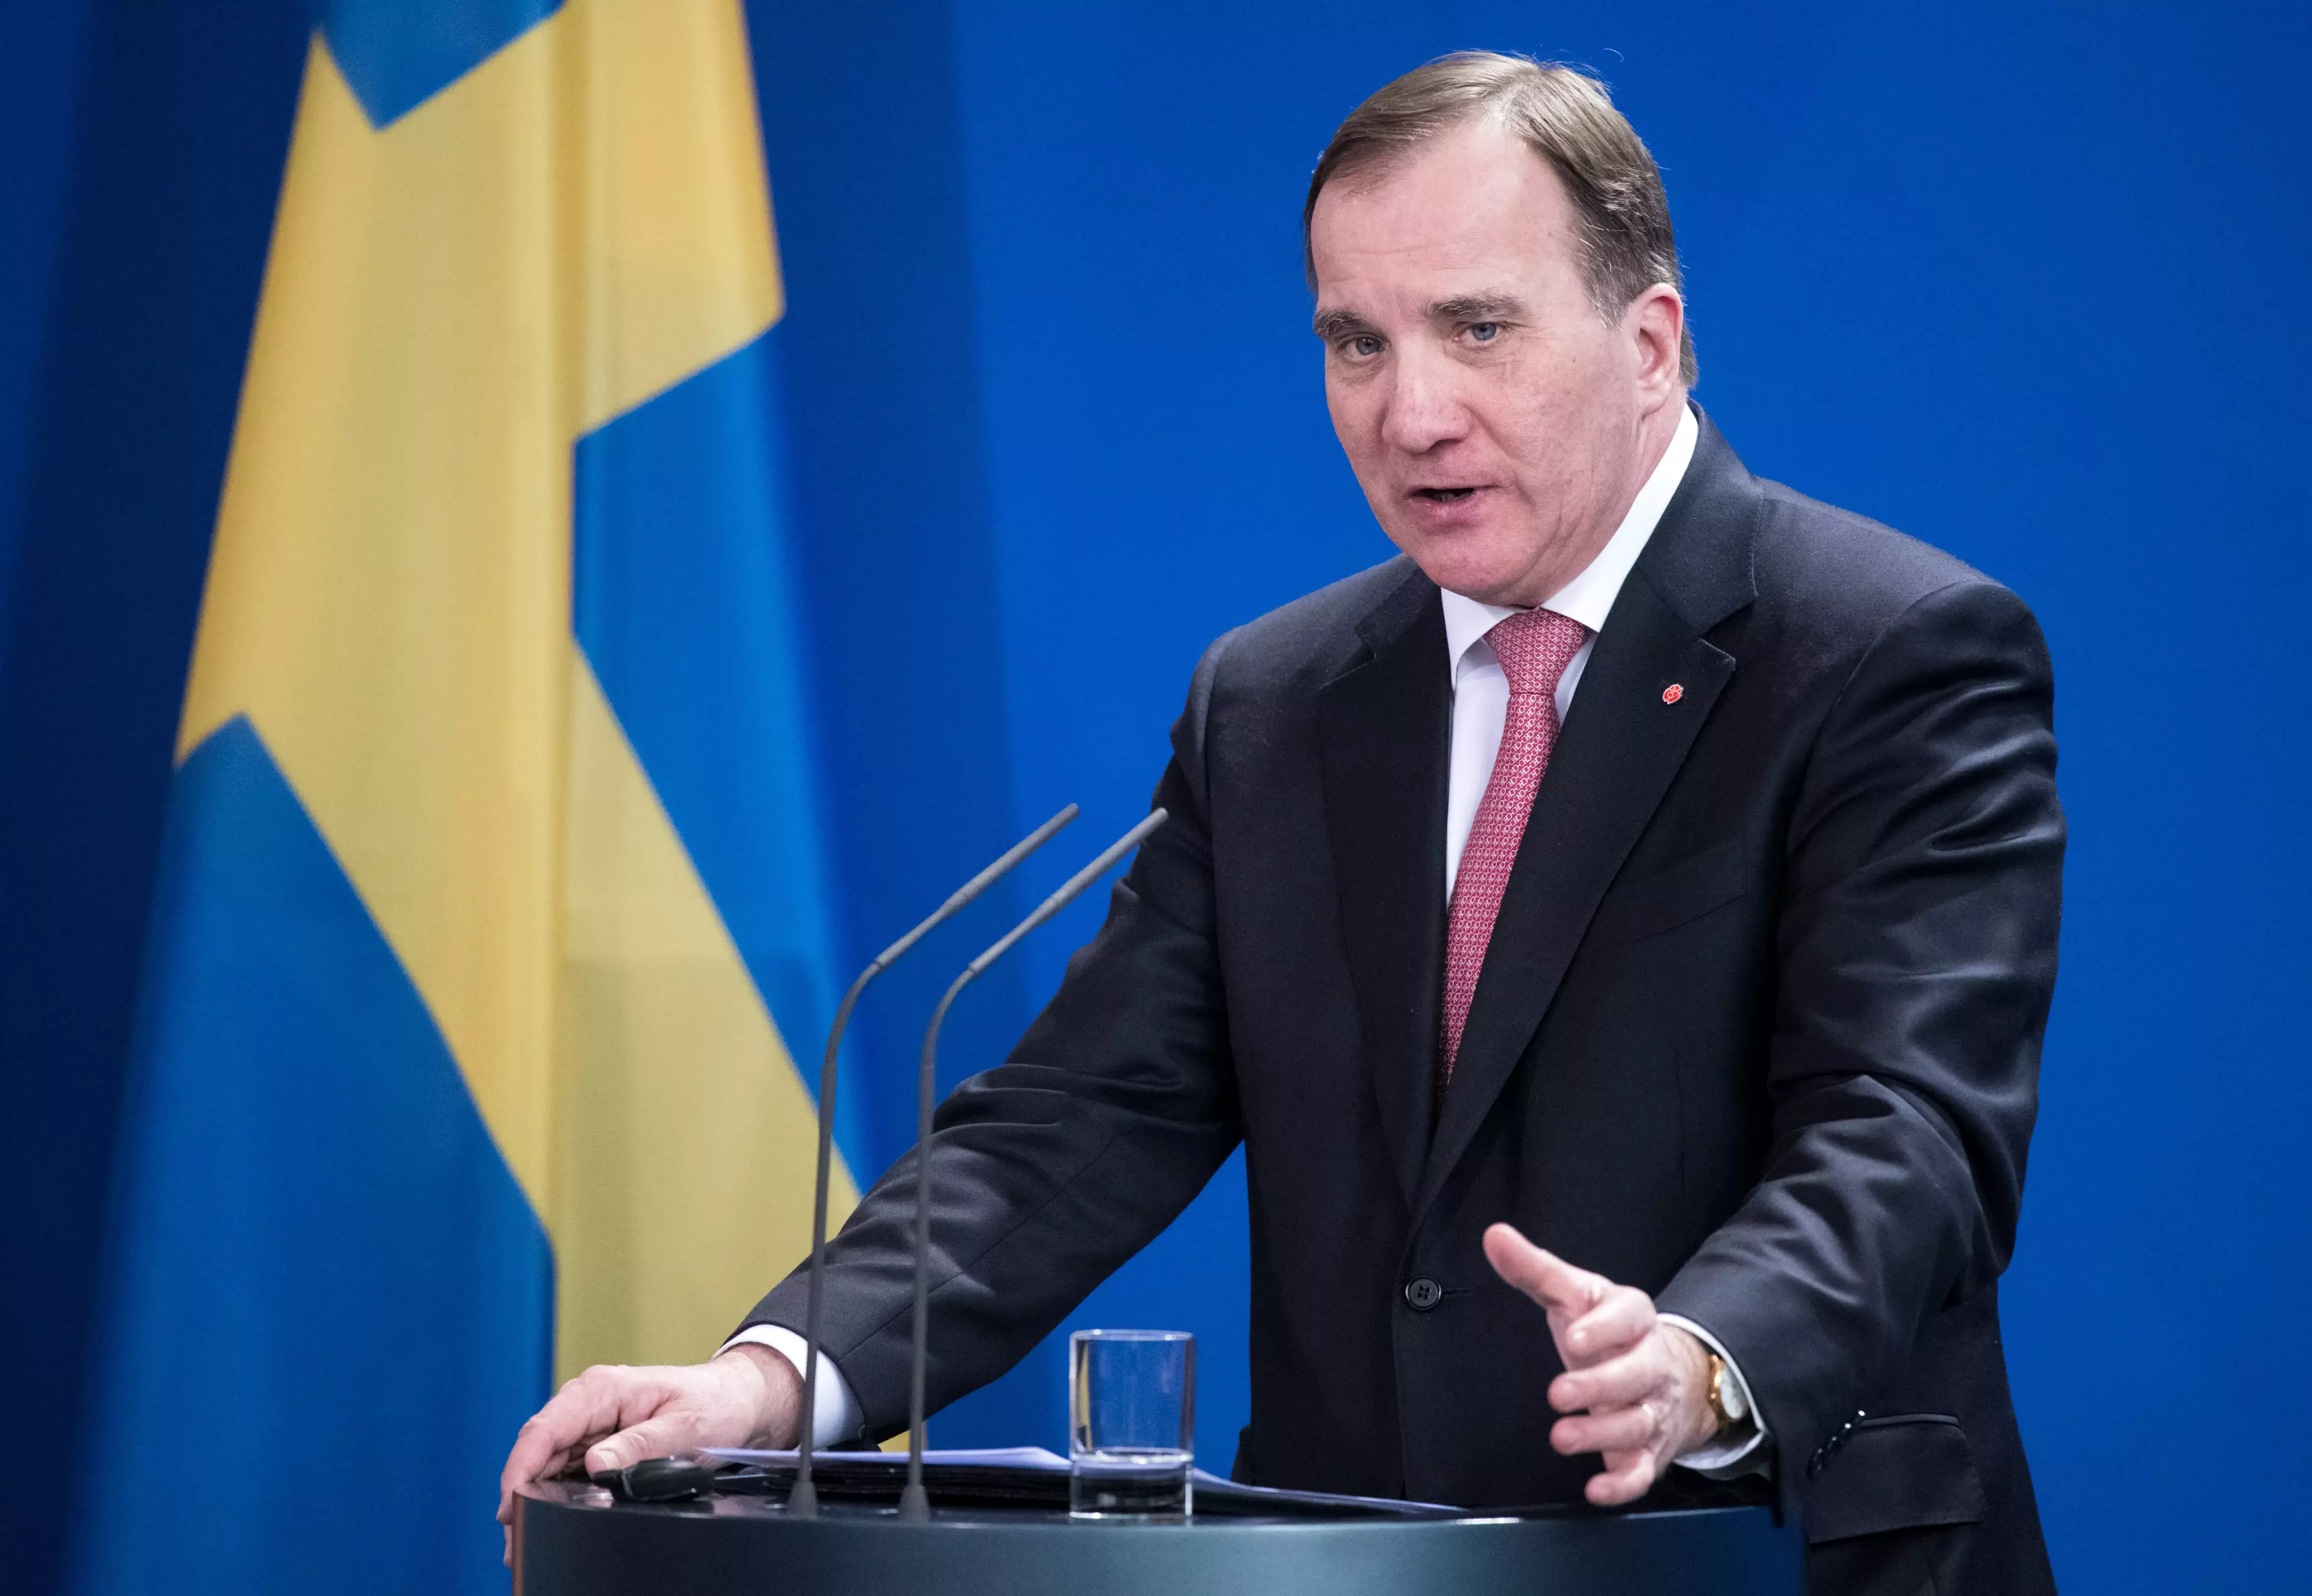 New Swedish Law Means 'Sex Without Consent' Is Now Considered Rape